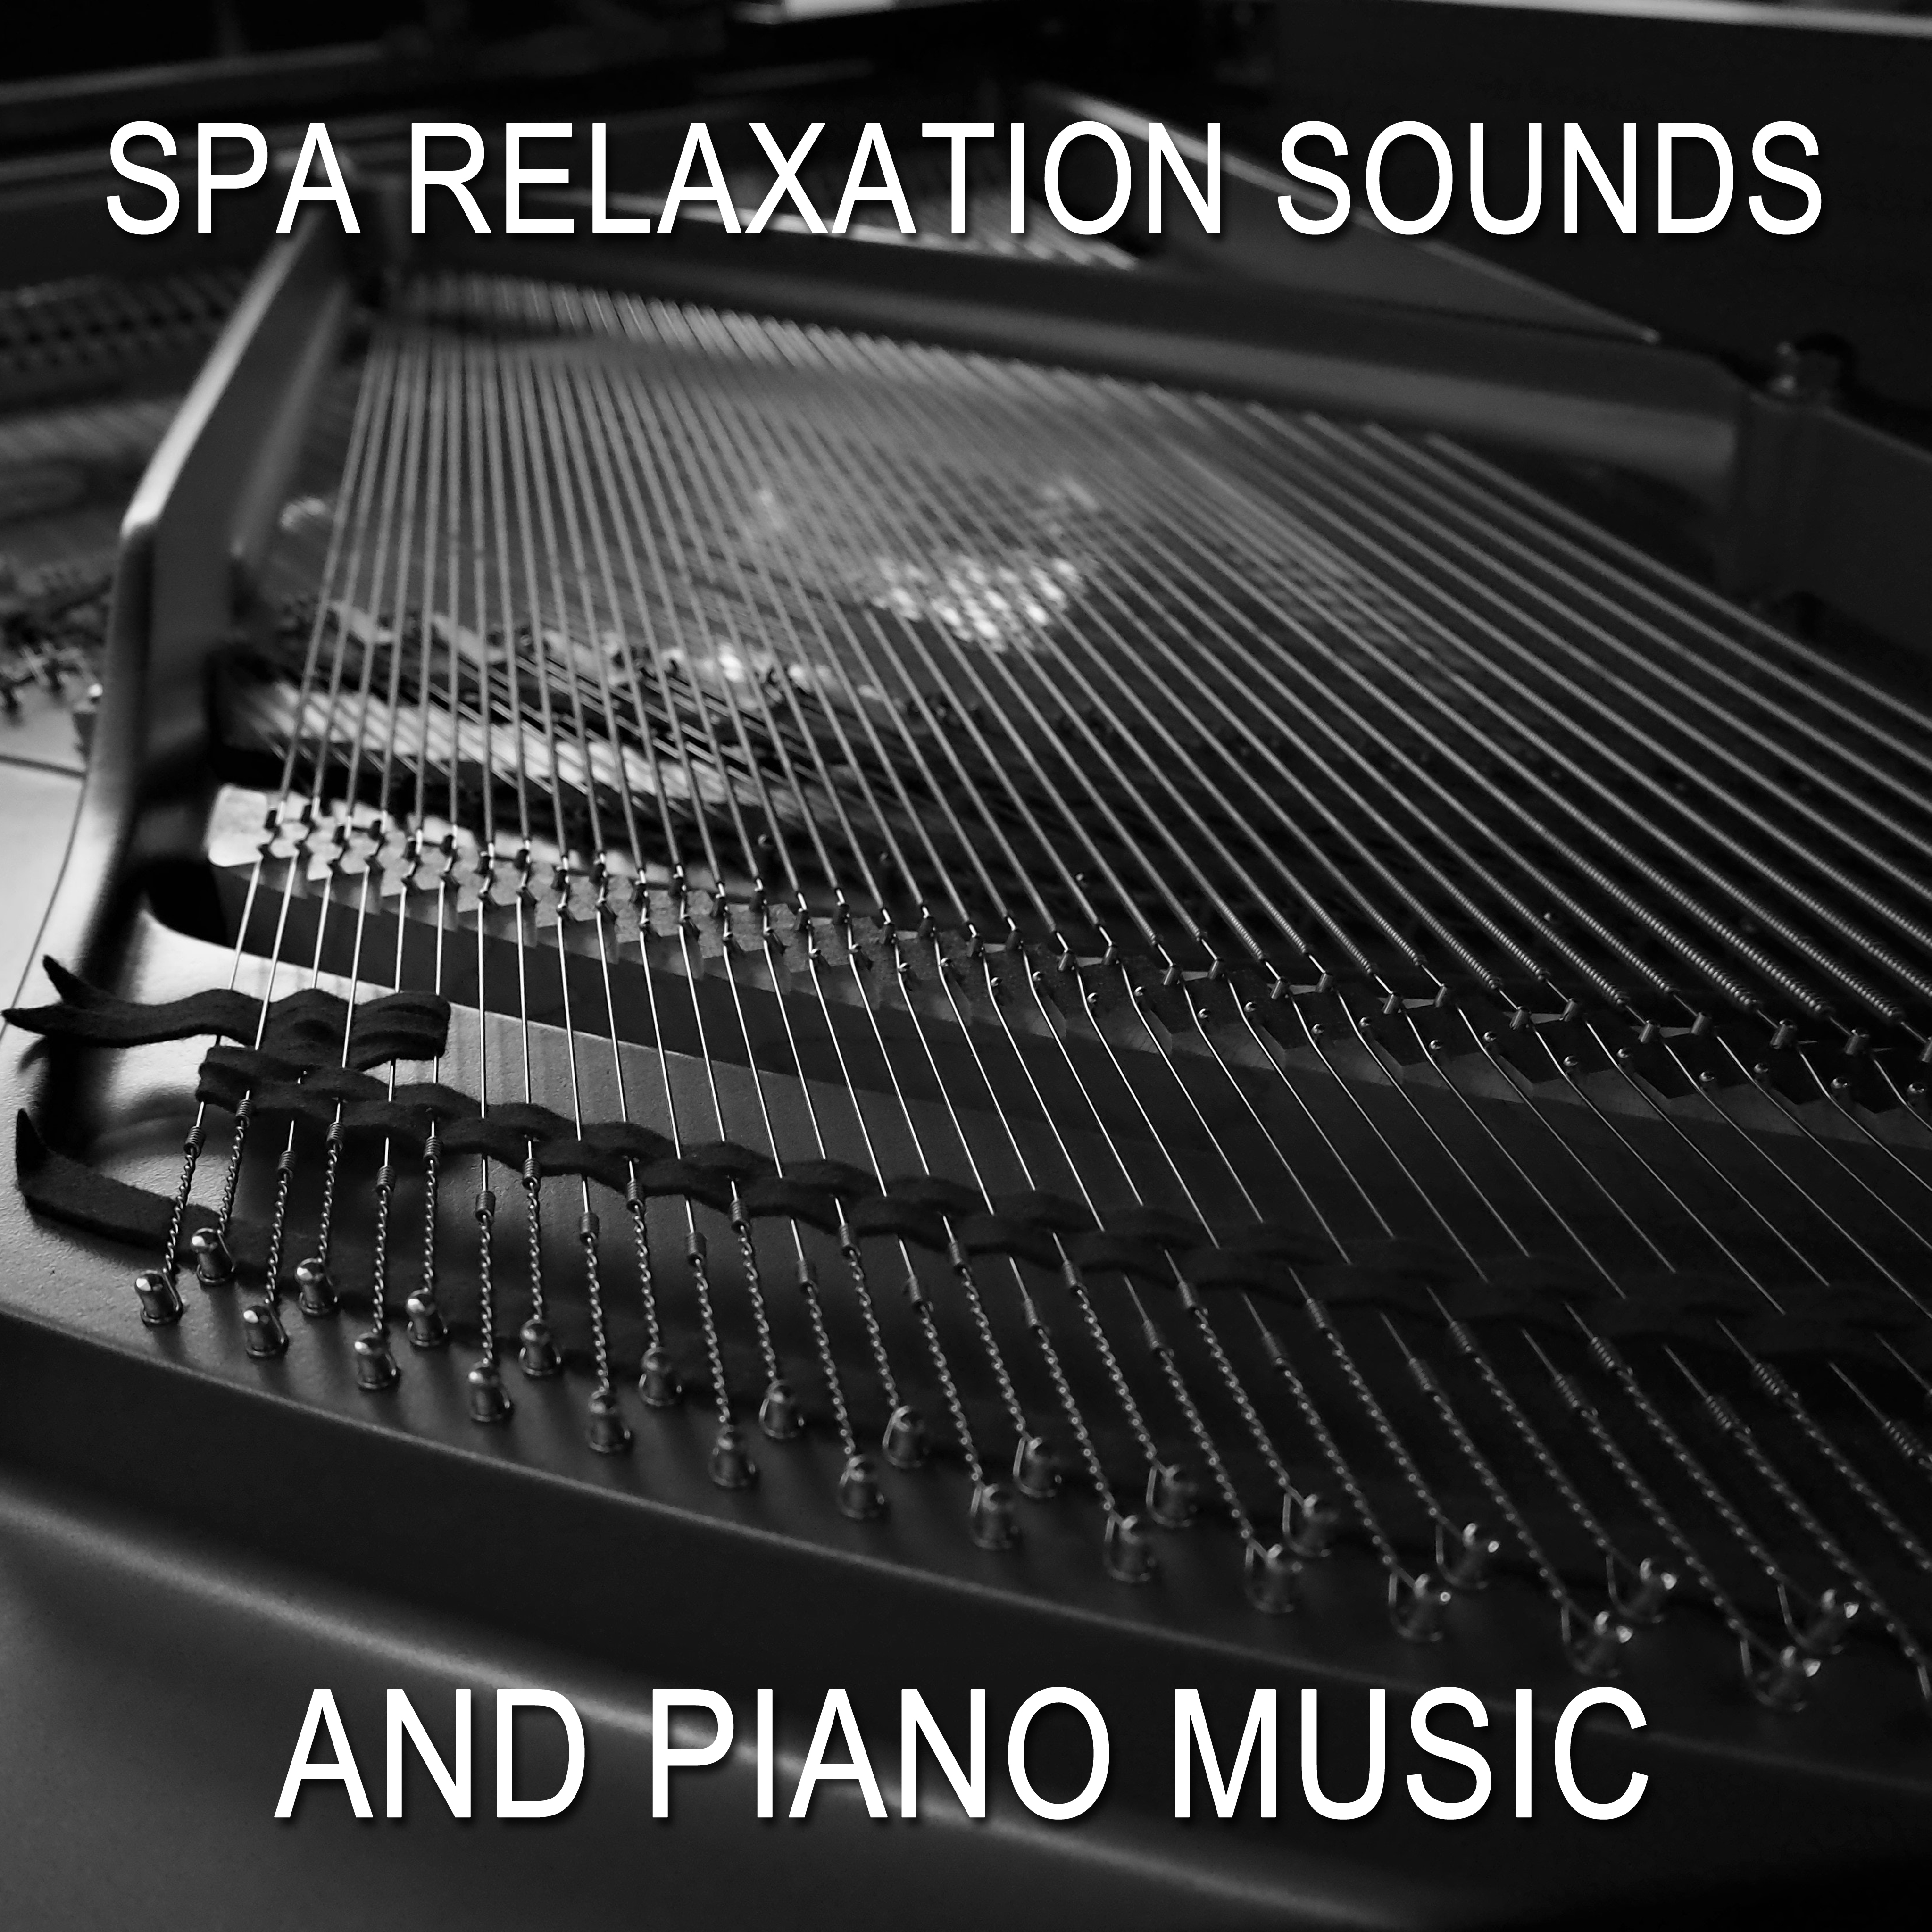 12 Spa Relaxation Sounds and Piano Music